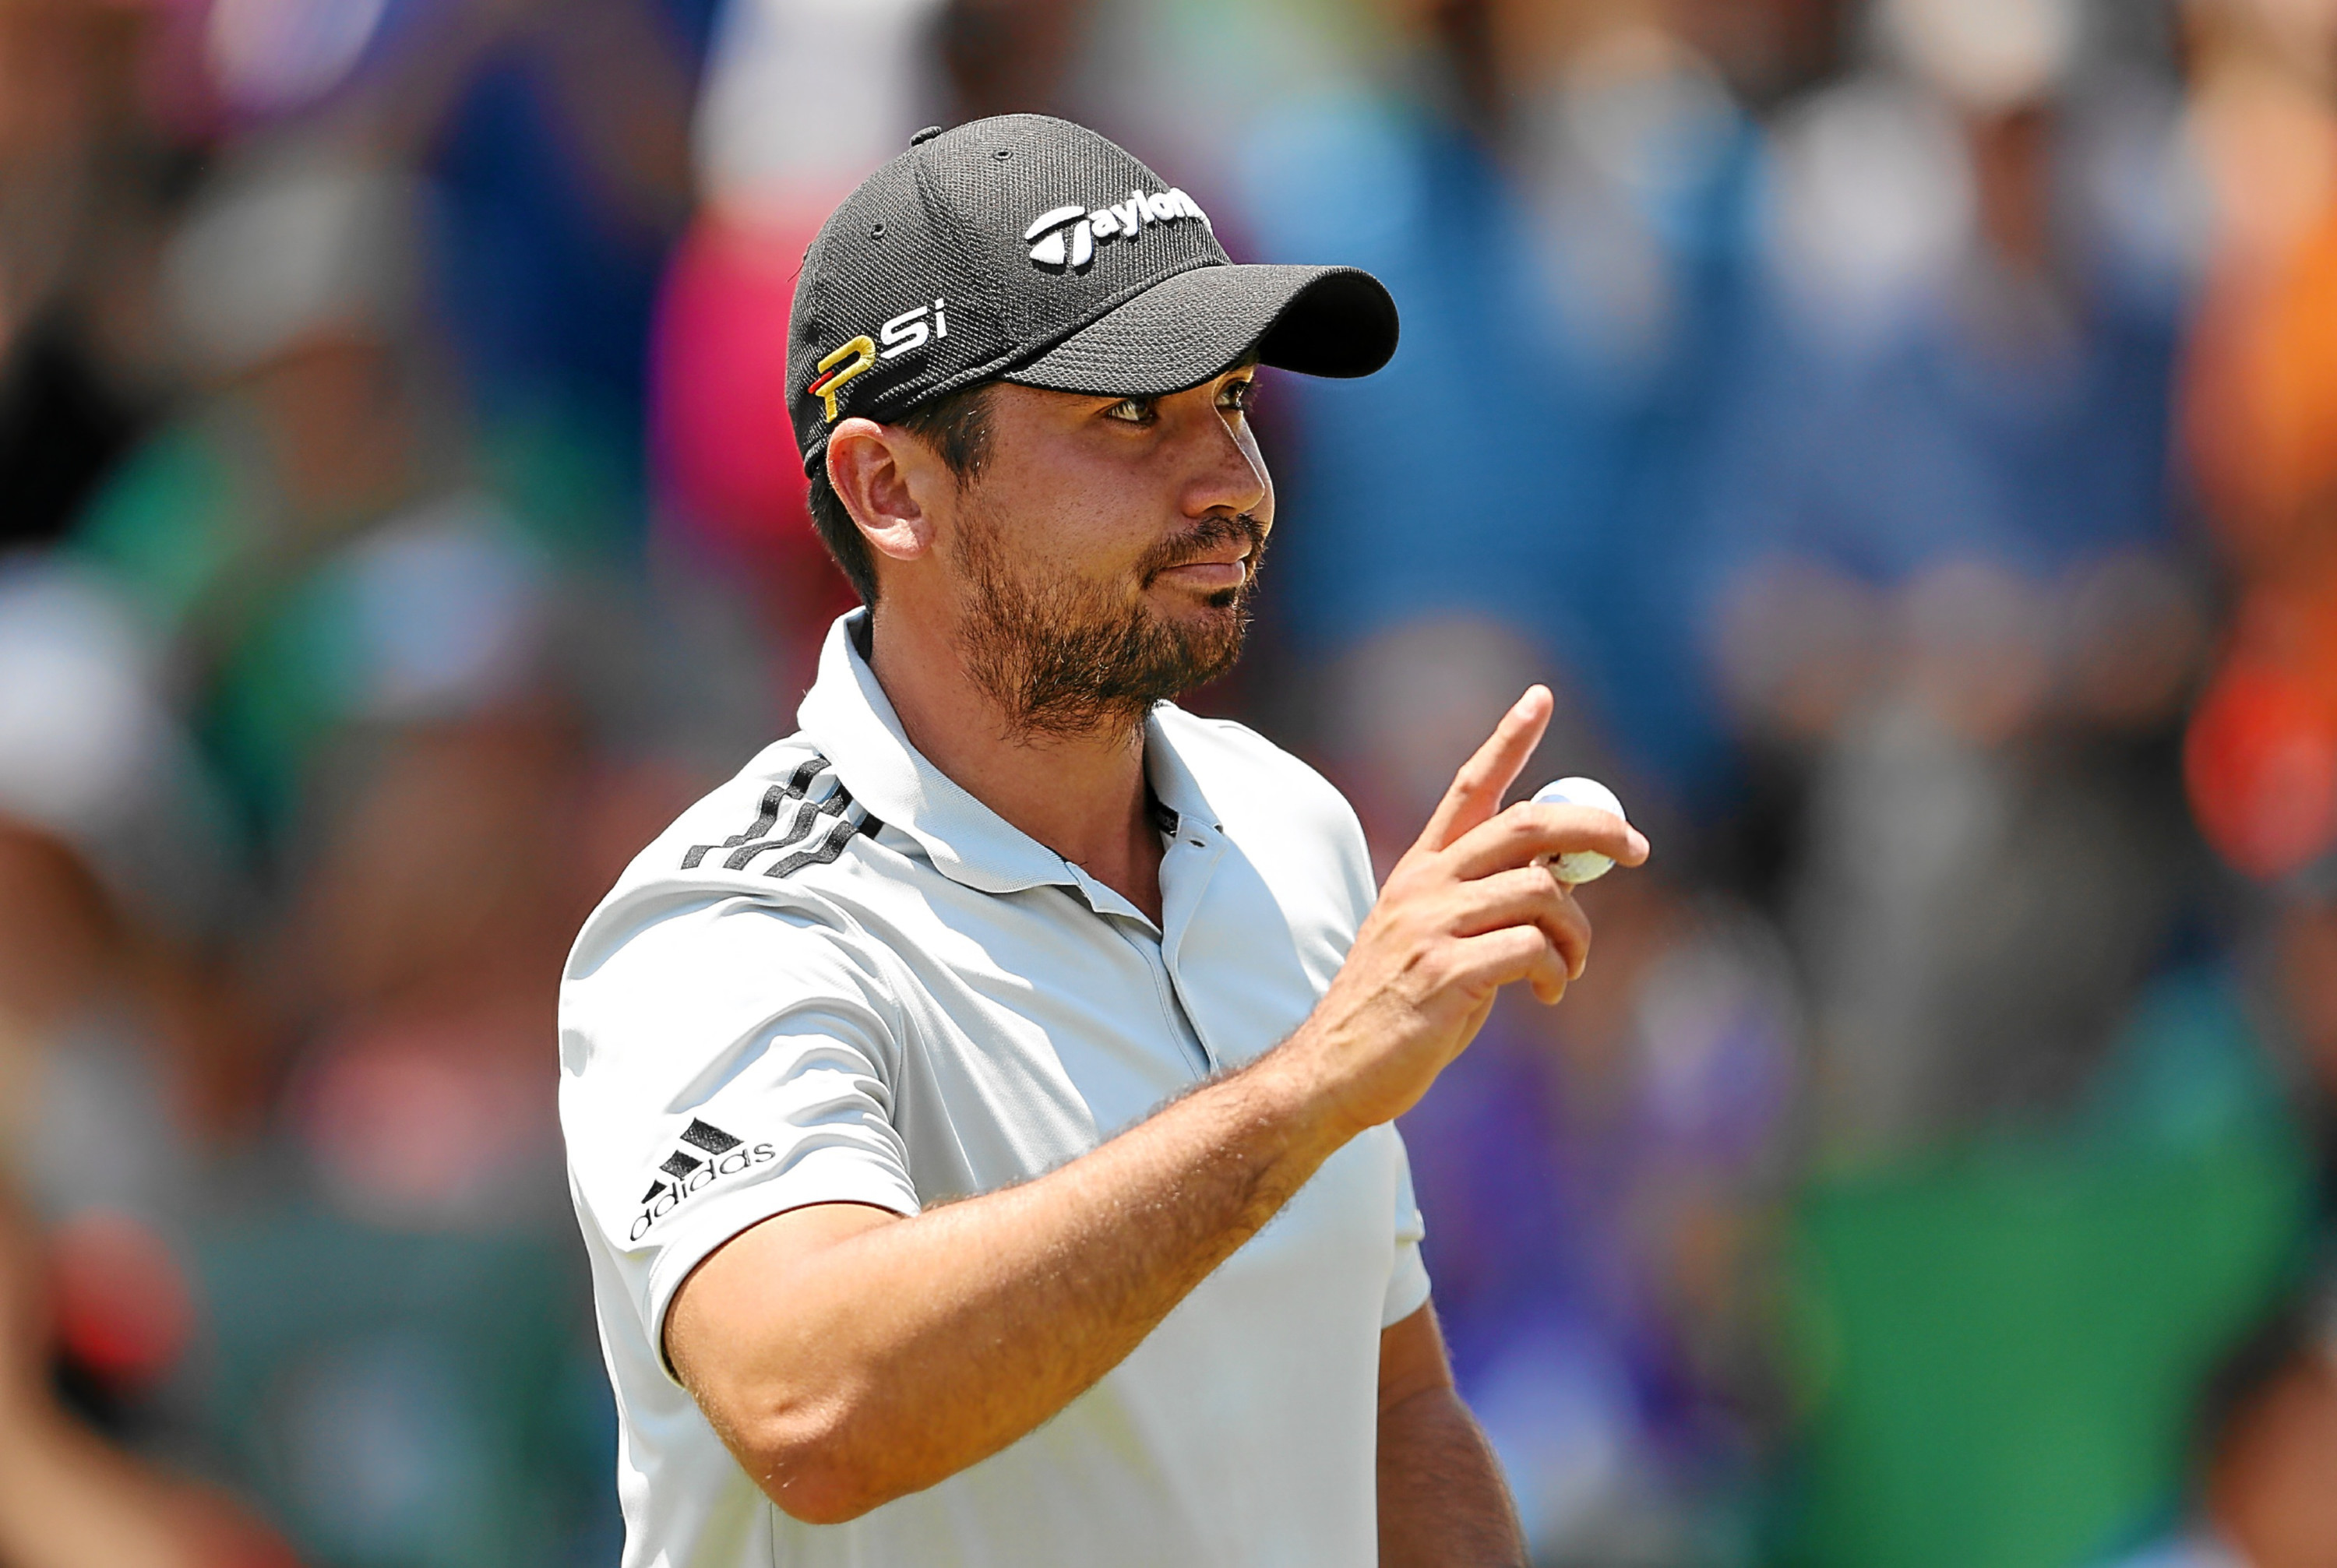 Jason Day led the day with a flawless 63.